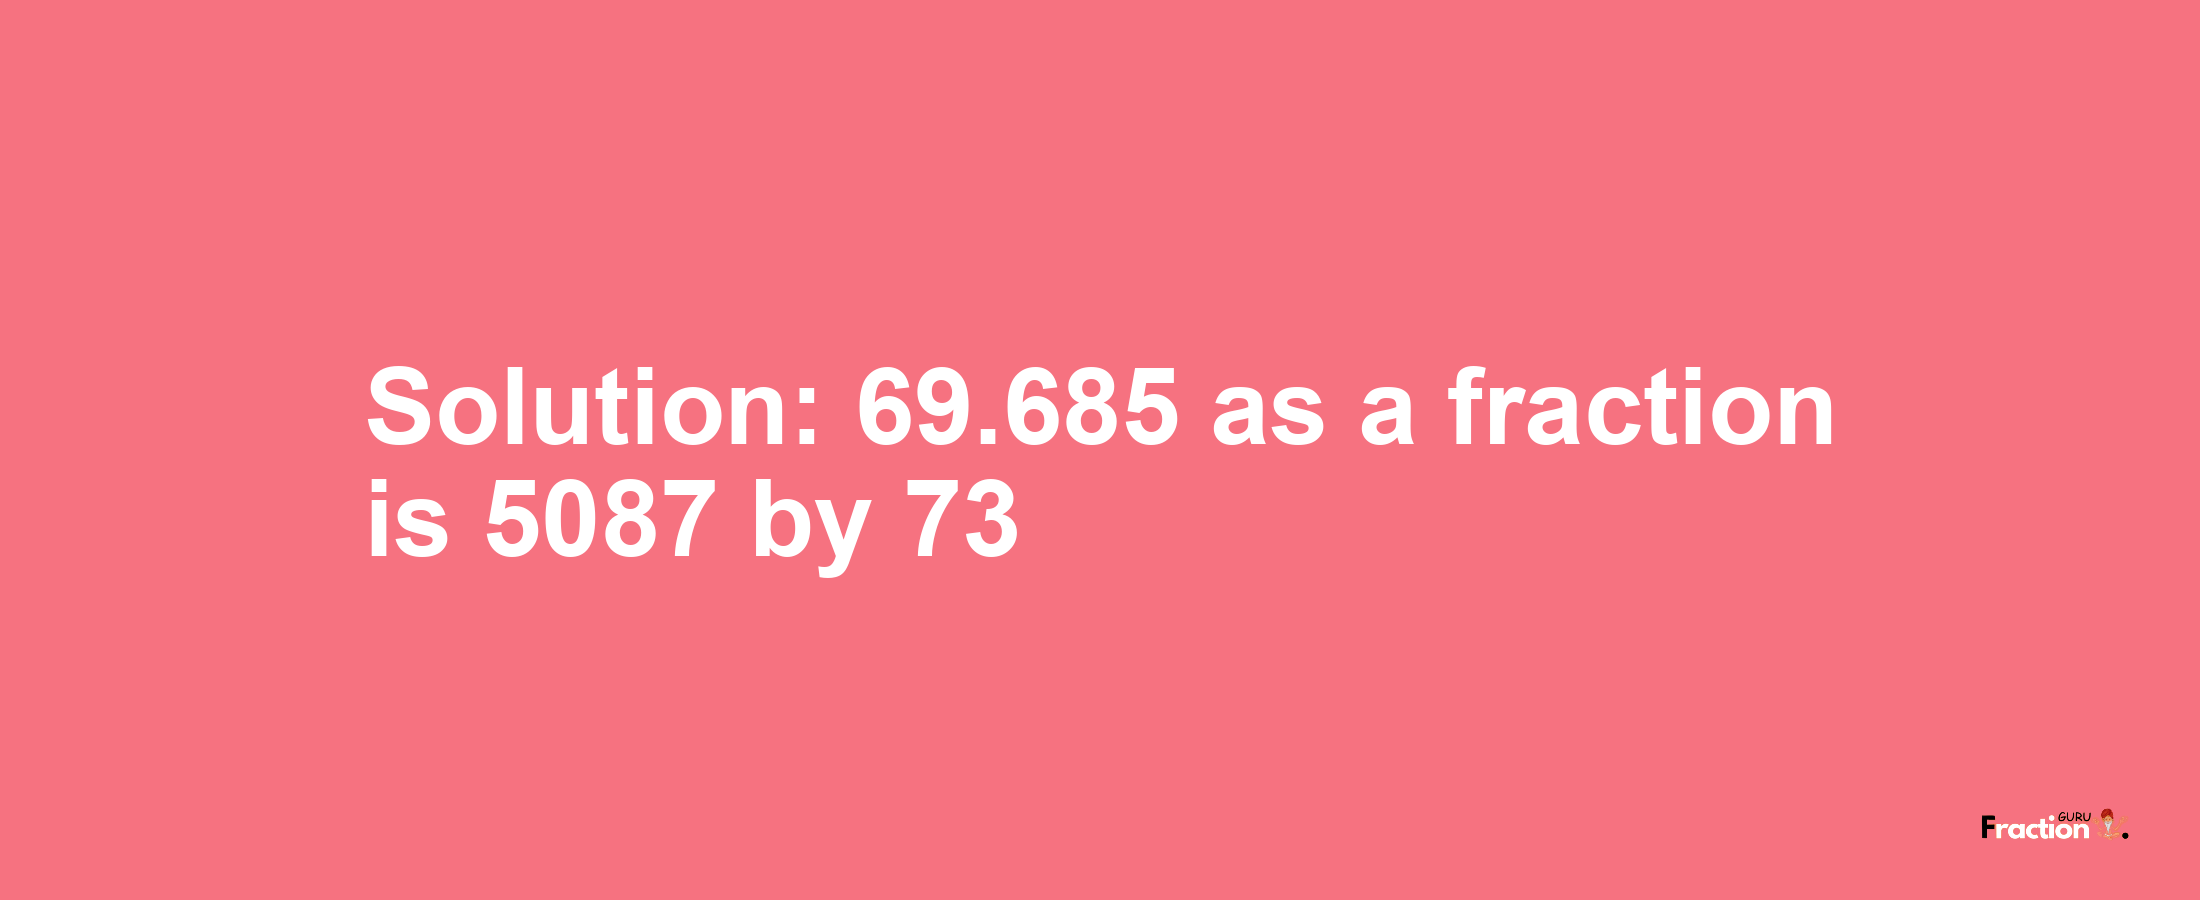 Solution:69.685 as a fraction is 5087/73